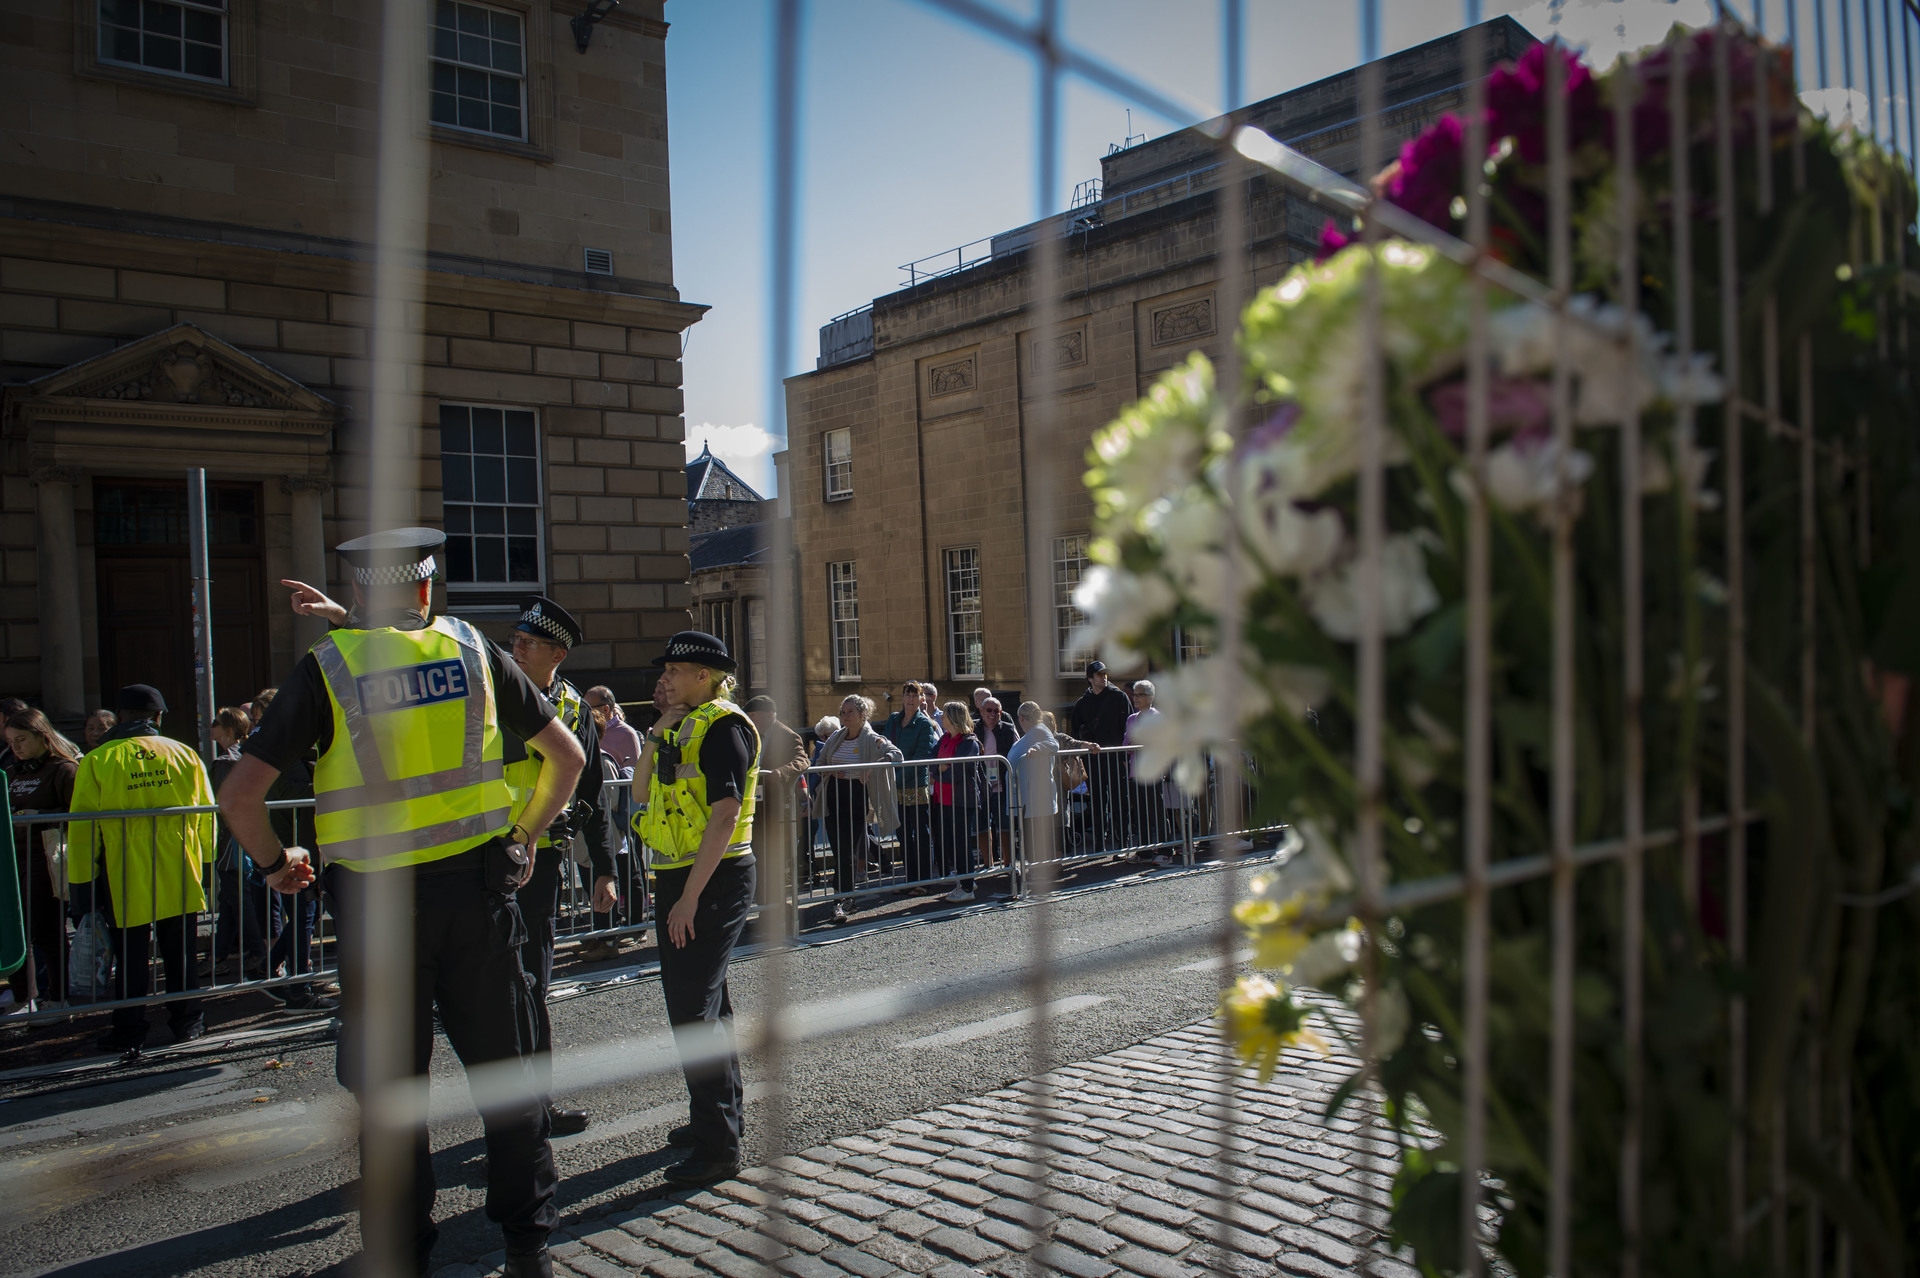 Well-wishers queued overnight to view the Queen's coffin (Chloe Adams)